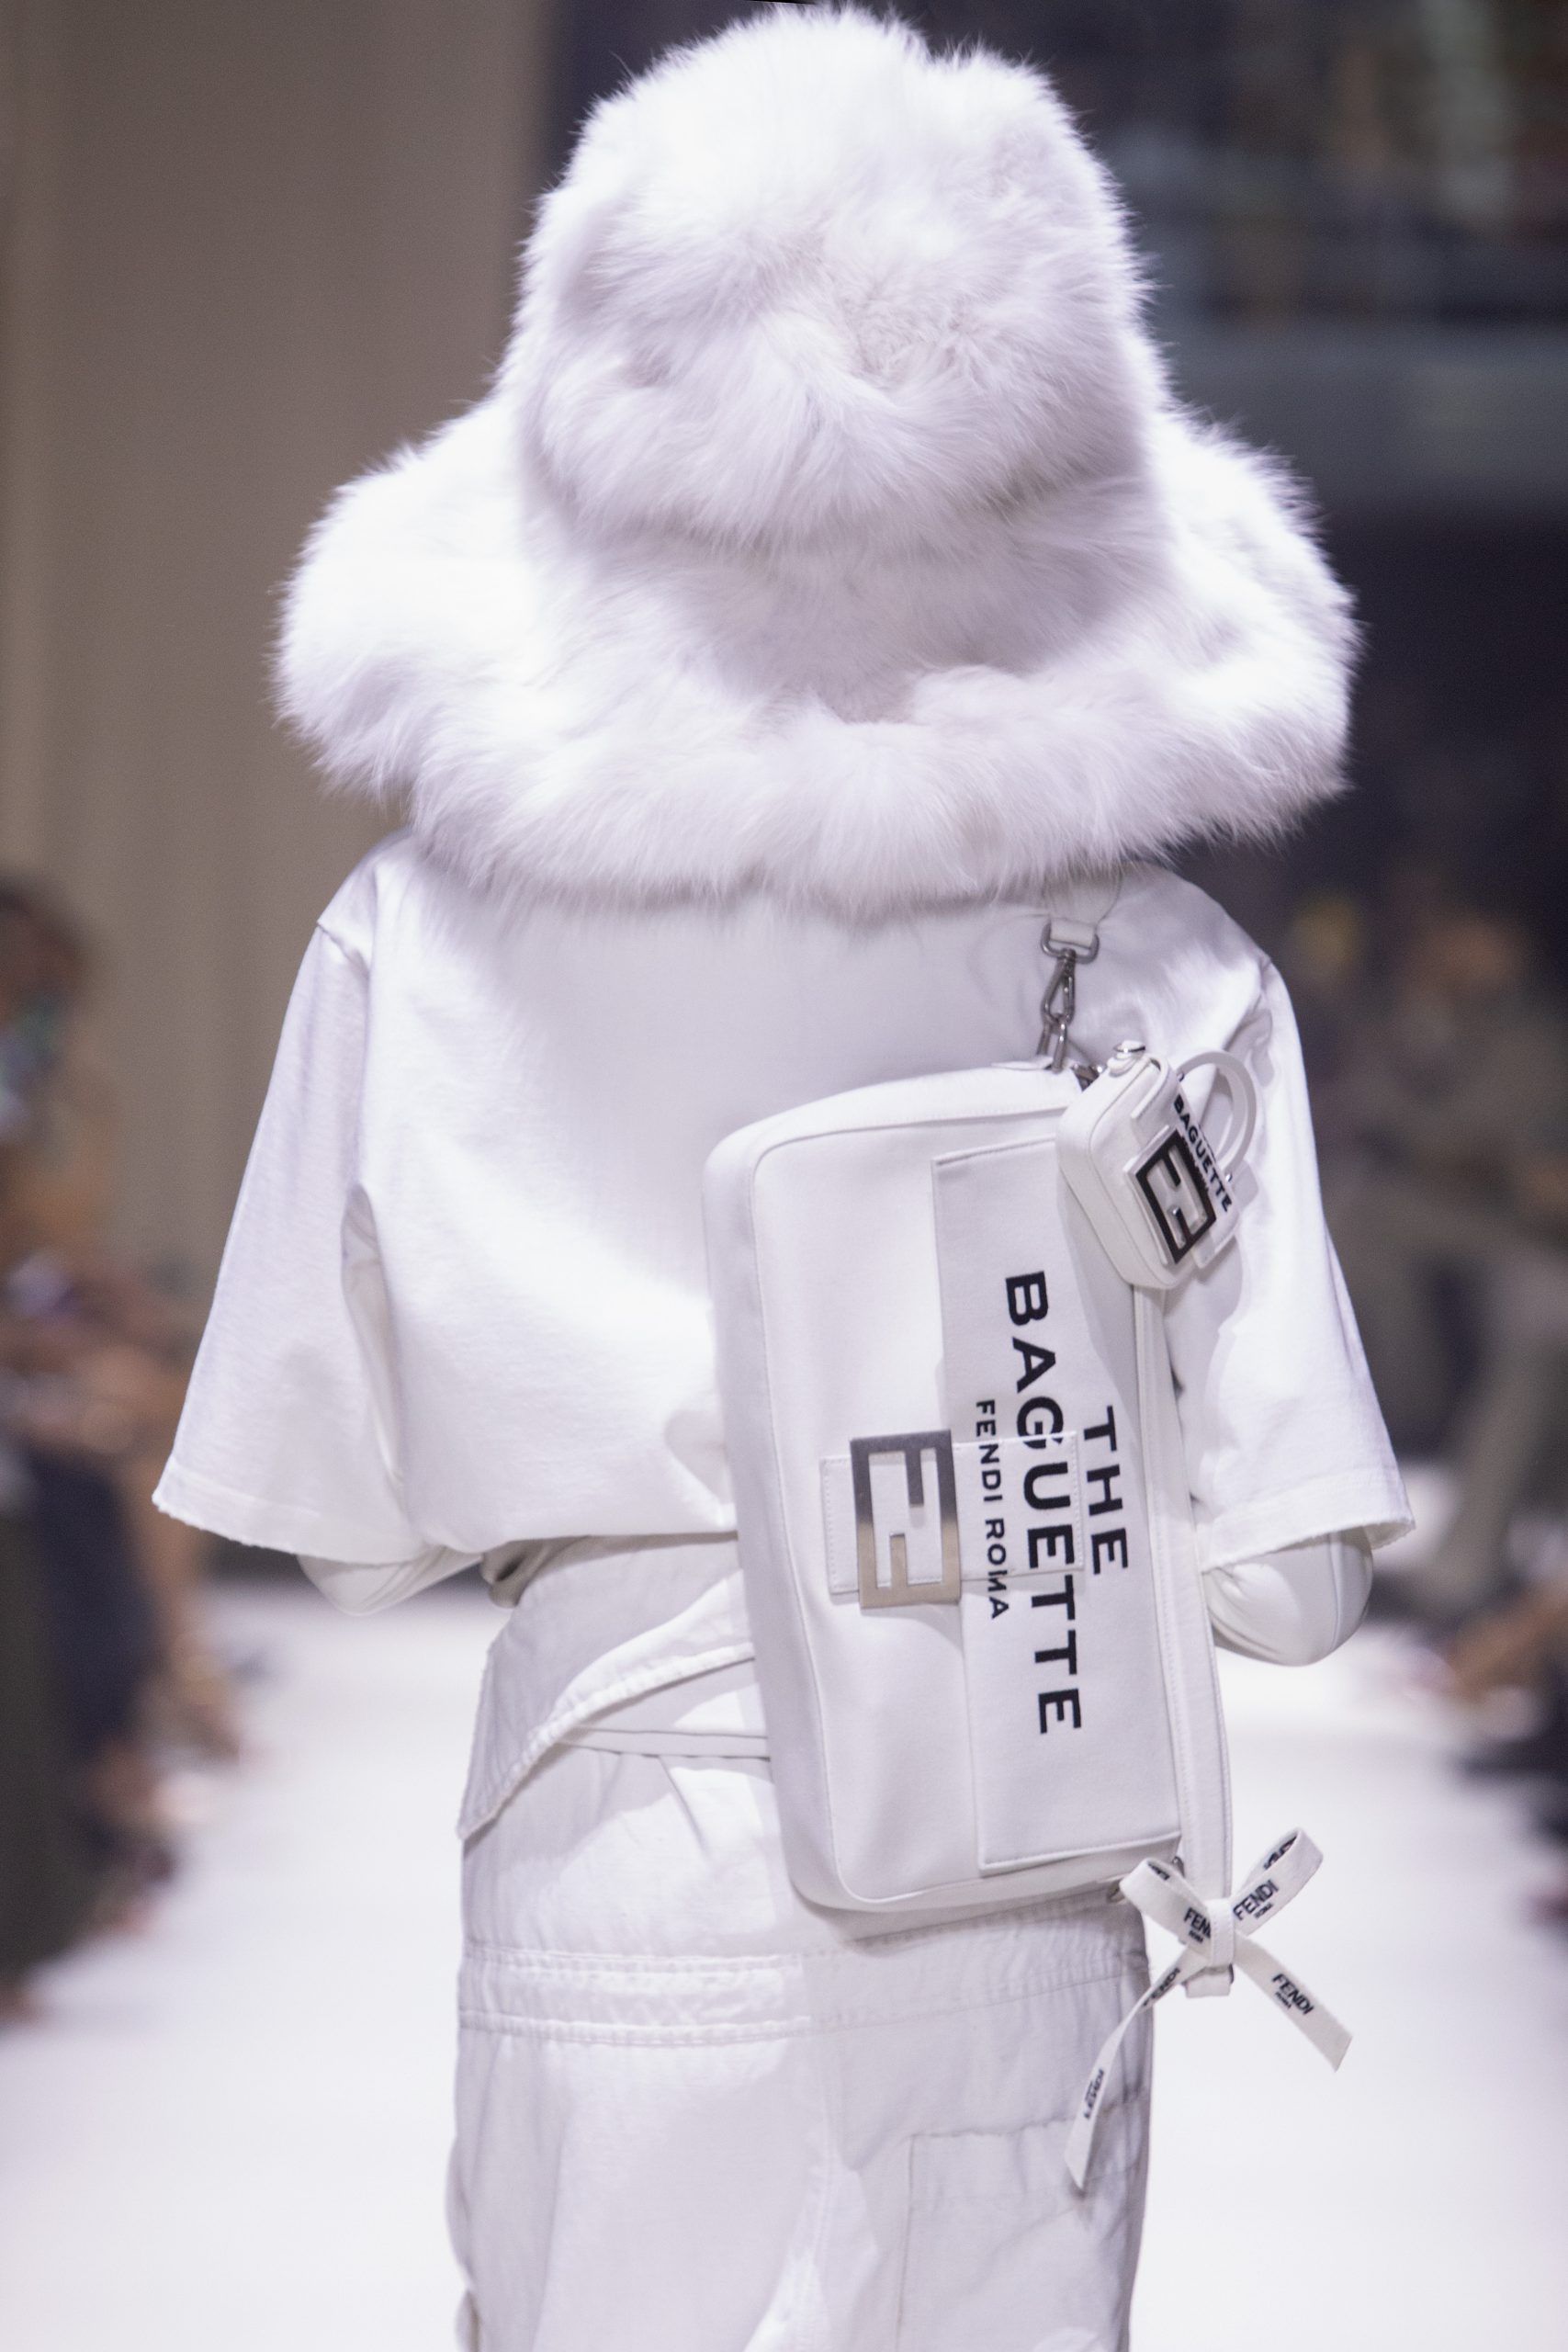 WE KNEW IT WAS COMING!! MORE LUXURY PRICE INCREASES… CHANEL, FENDI